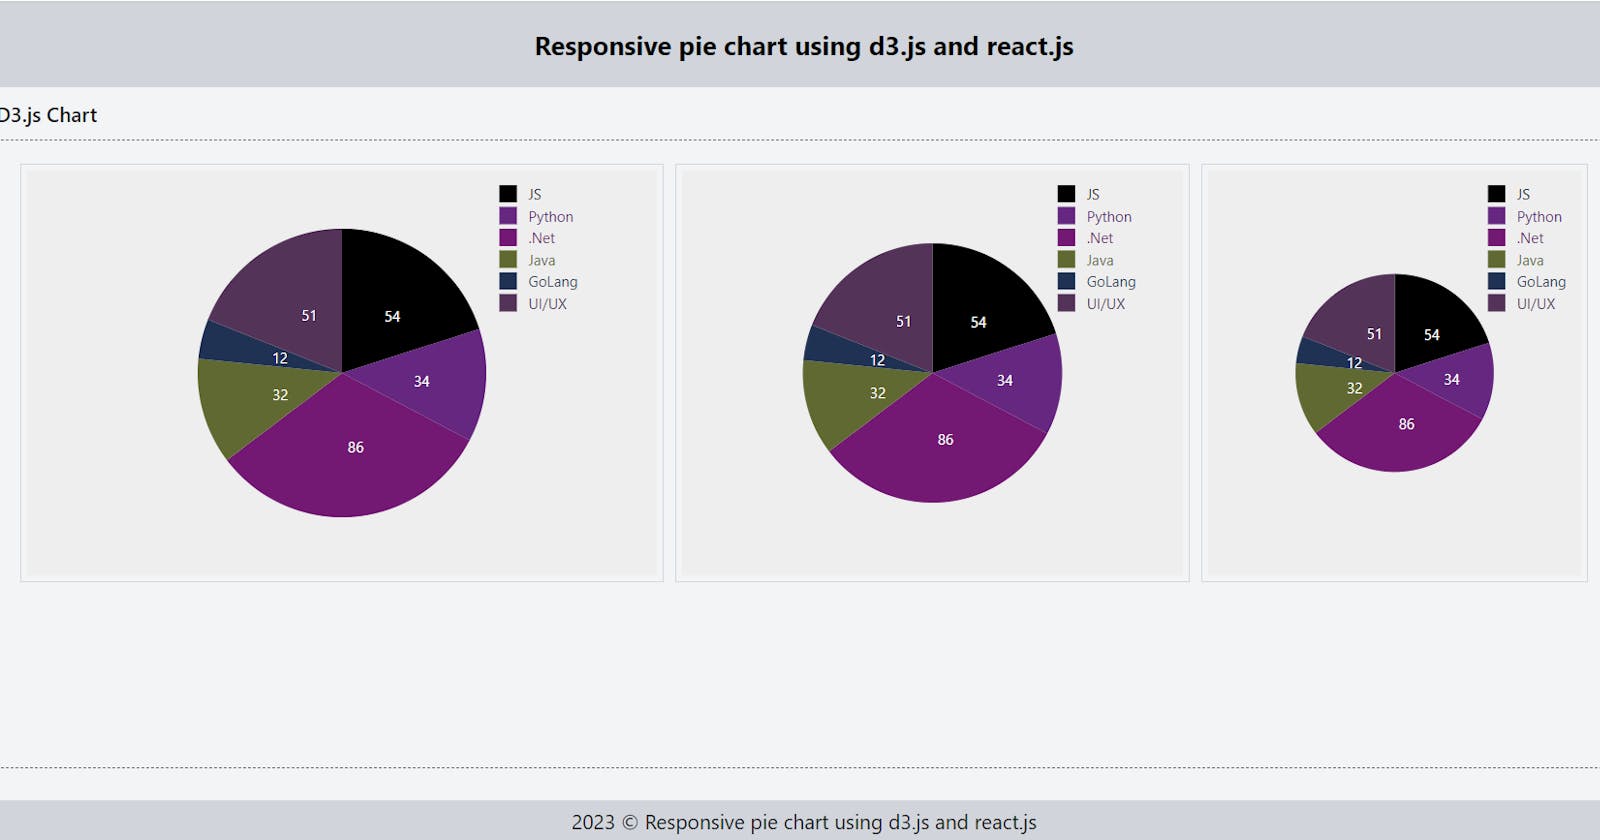 Creating a responsive pie chart using d3.js in React.js